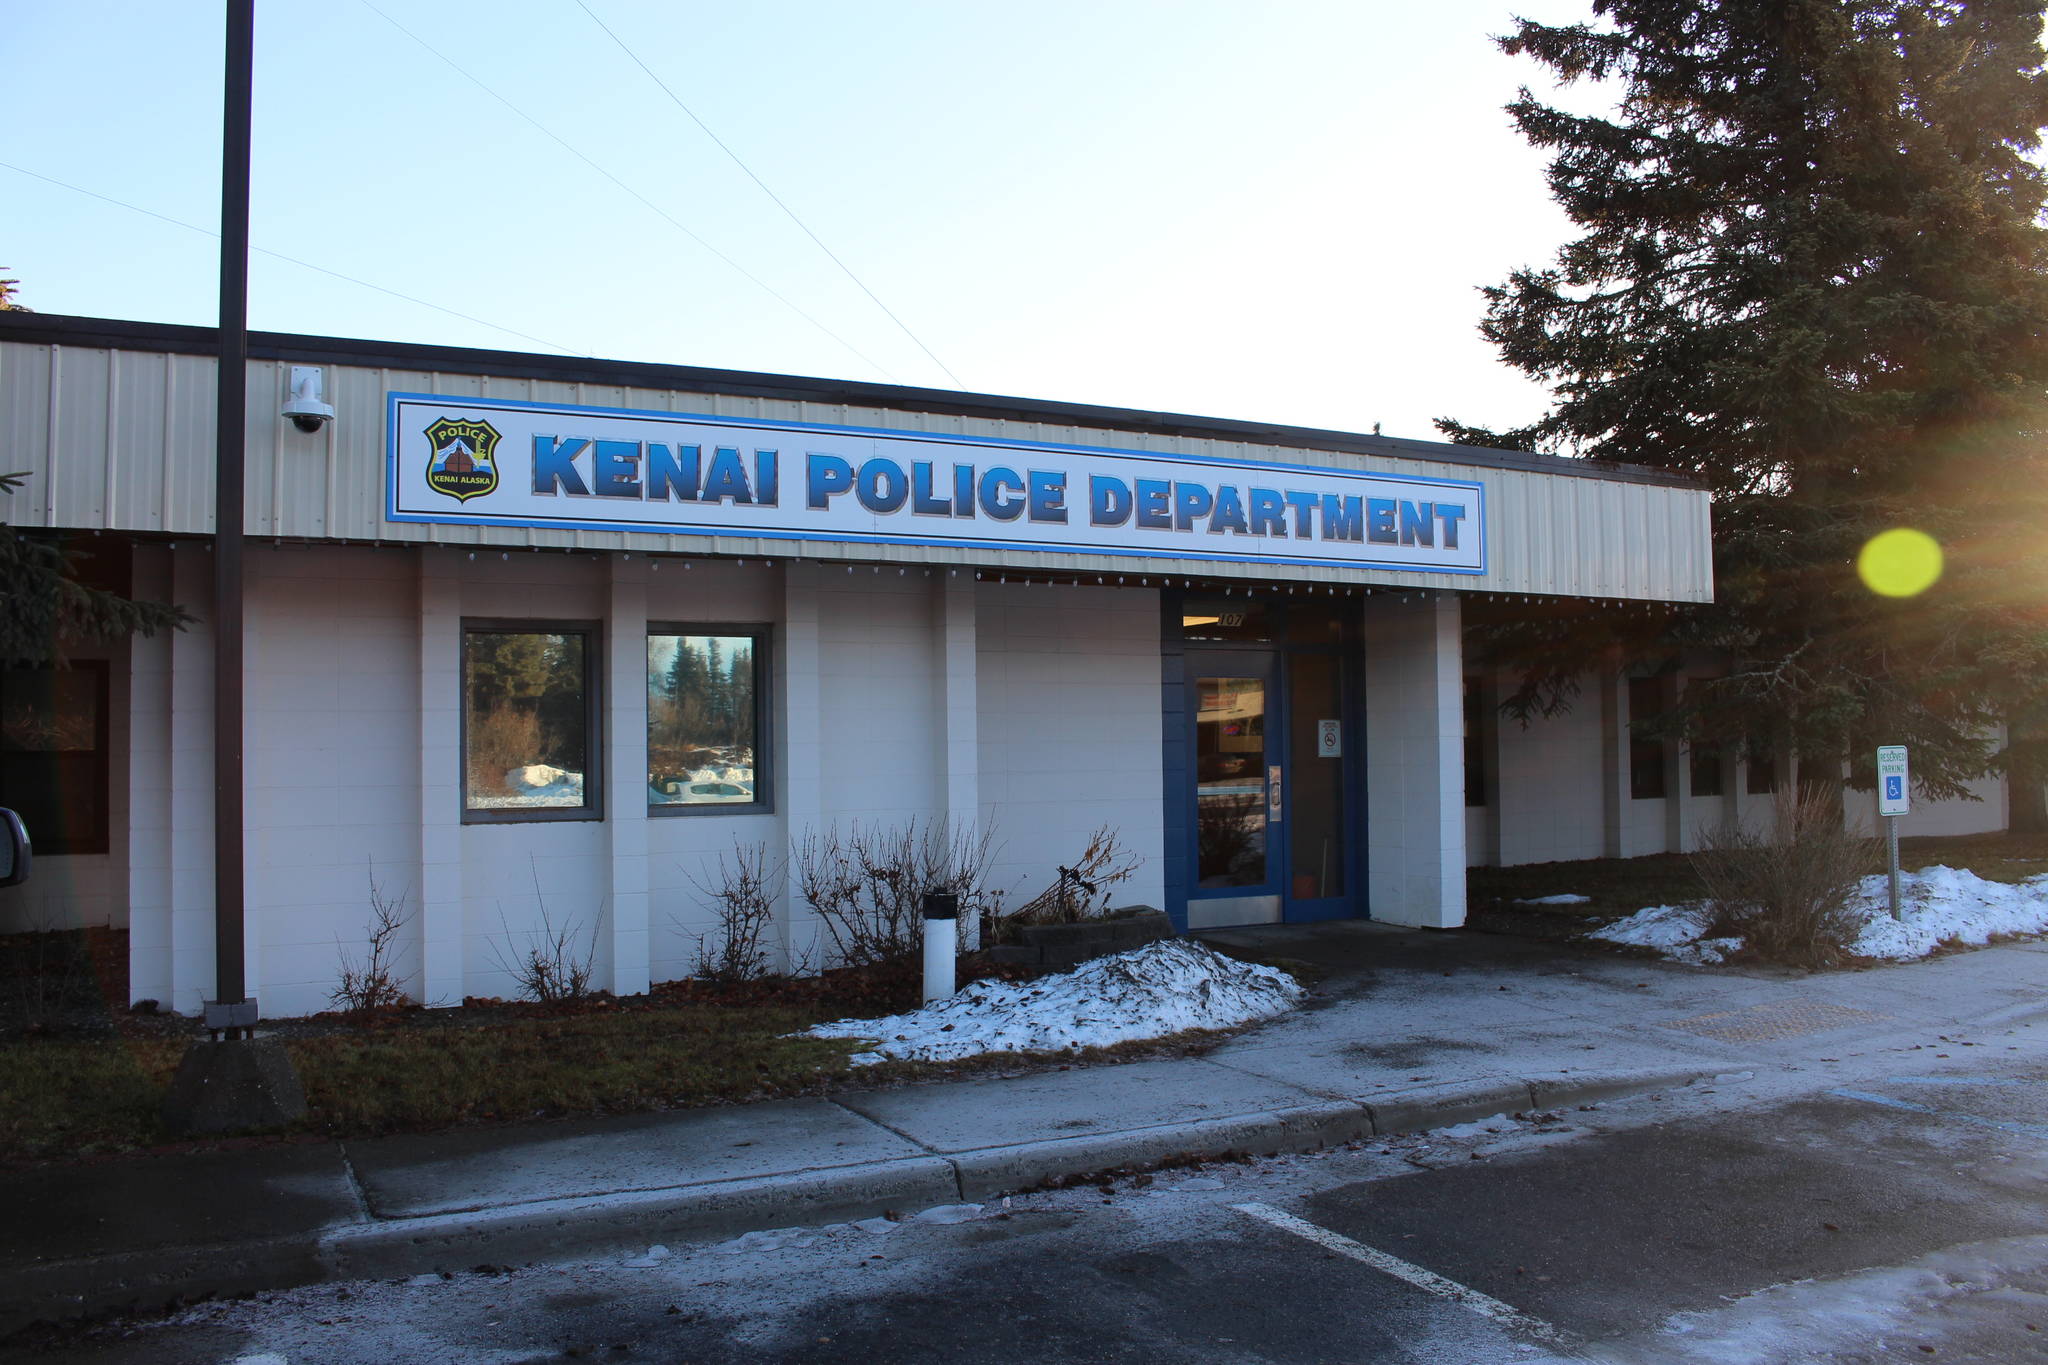 The front of the Kenai Police Department as seen on Dec. 10, 2019. (Peninsula Clarion file)